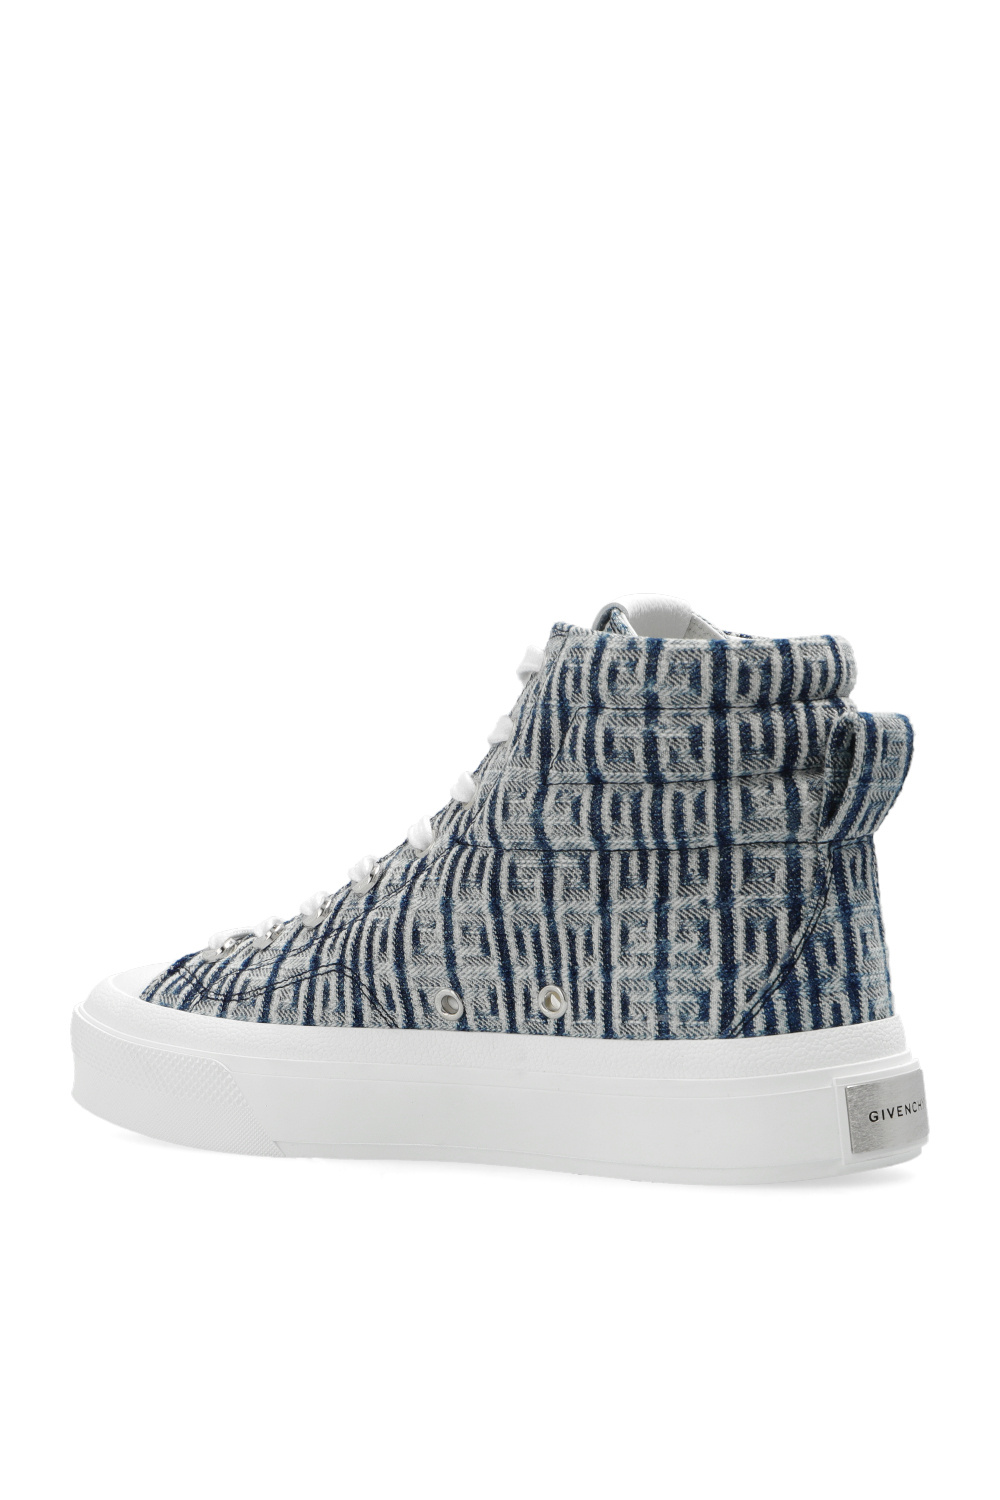 givenchy WEDGE ‘City’ high-top sneakers